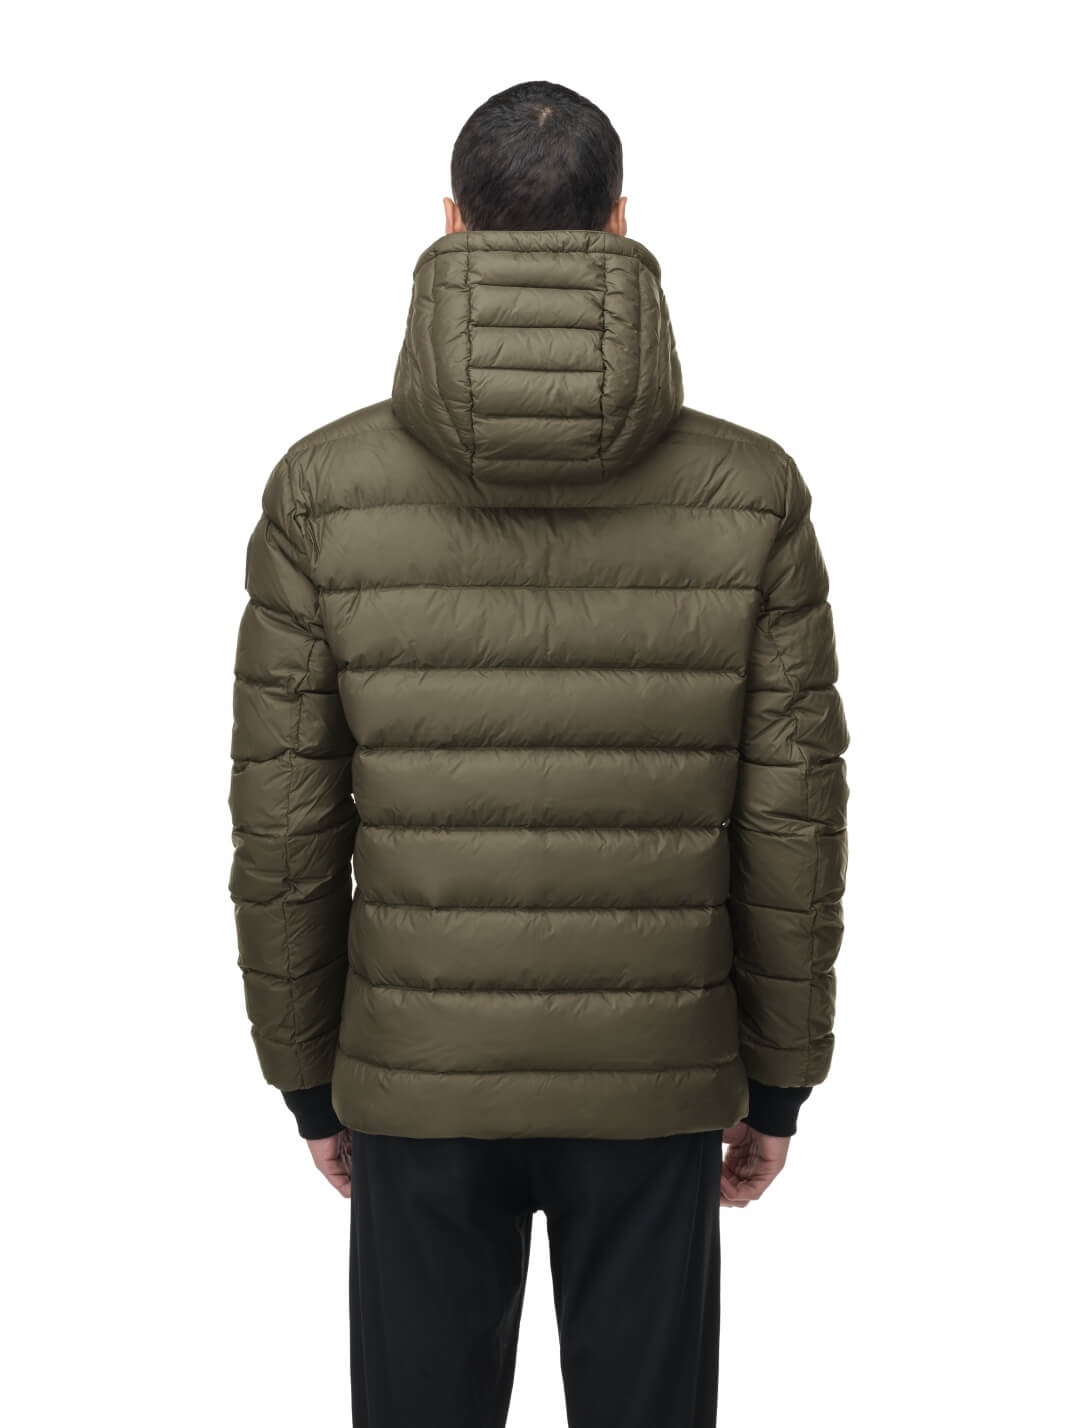 Chris Men's Mid Weight Reversible Puffer Jacket in hip length, Canadian duck down insulation, non-removable adjustable hood, ribbed cuffs, and quilted body on reversible side, in Fatigue